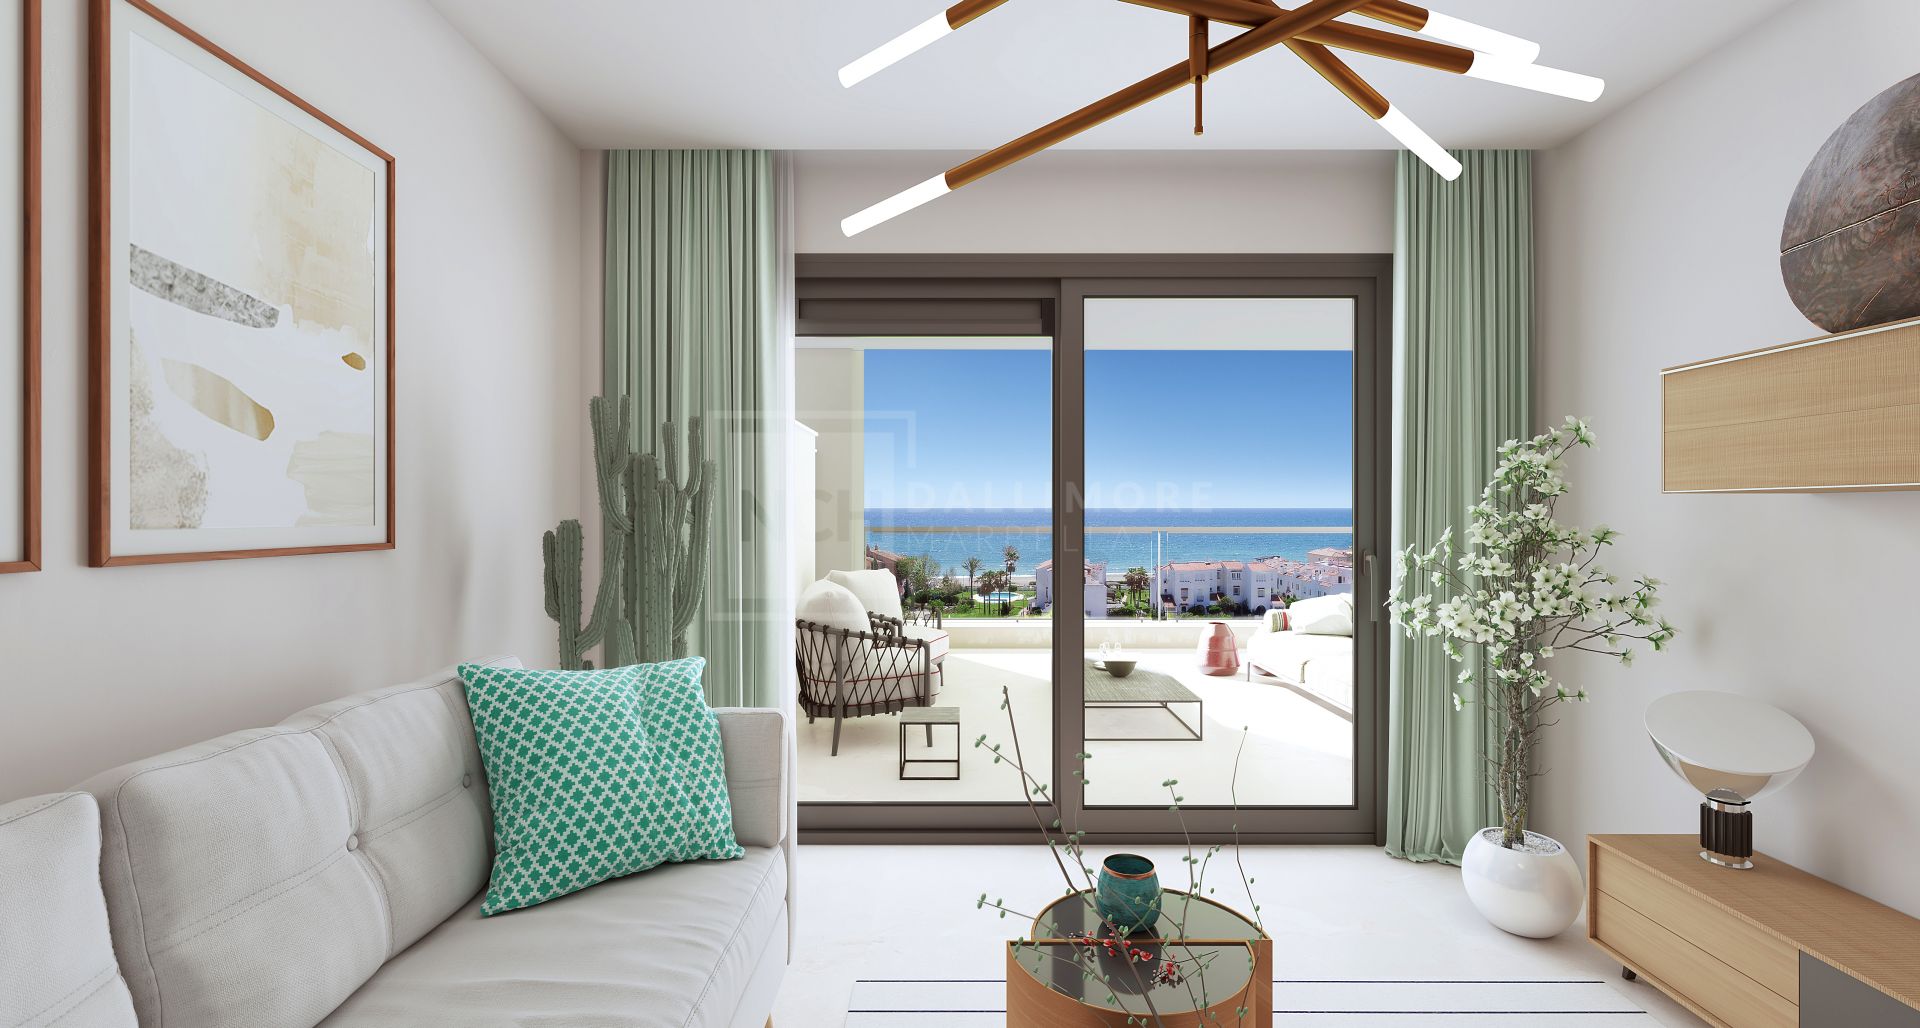 SOLEMAR - BRAND NEW APARTMENTS WITH THE MOST AMAZING SEAVIEWS